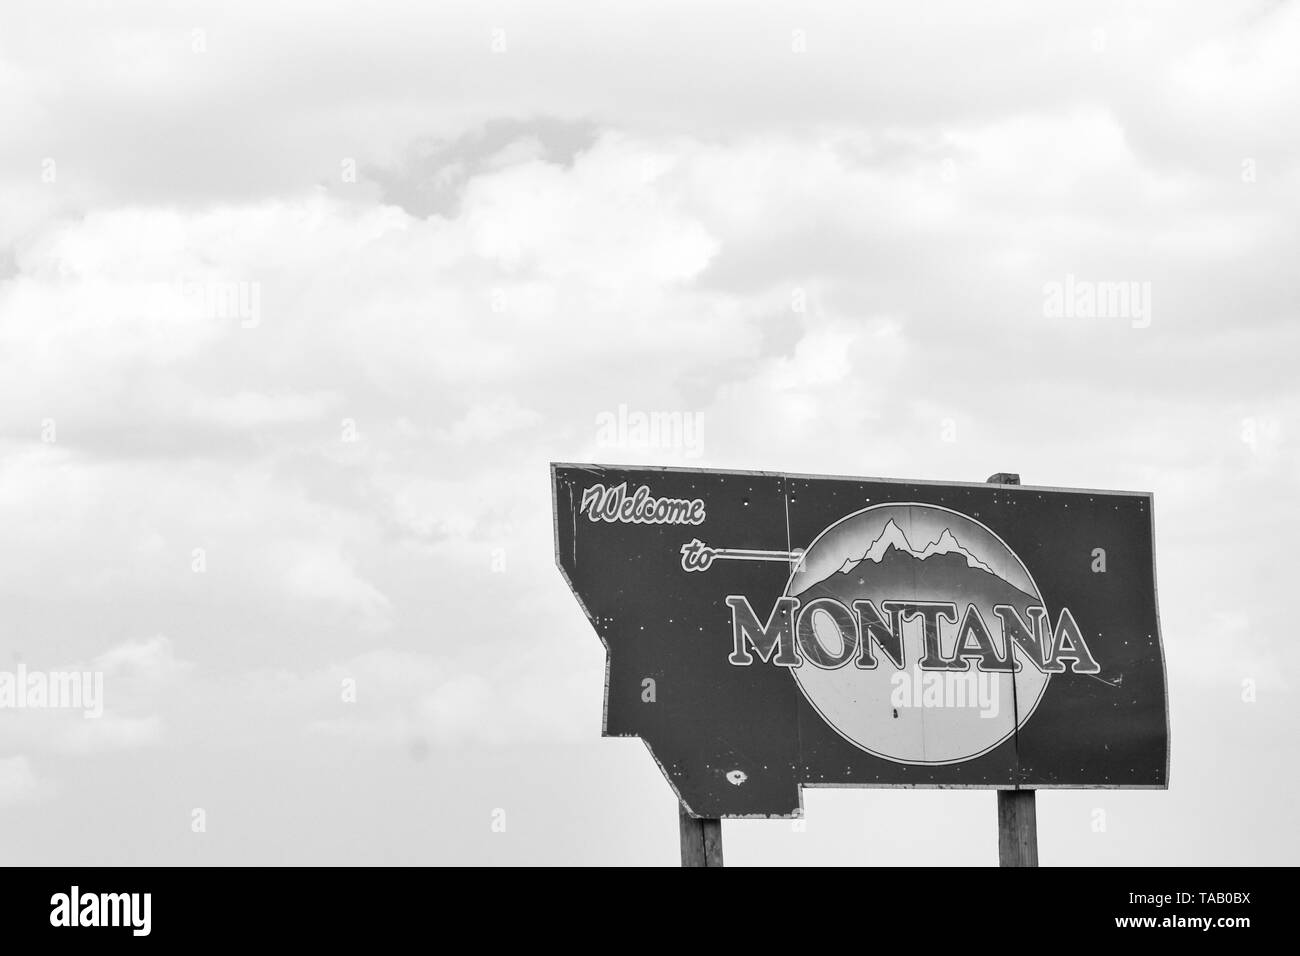 Roadside sign against cloudy sky, reading 'Welcome to Montana'.  Black and White. Stock Photo